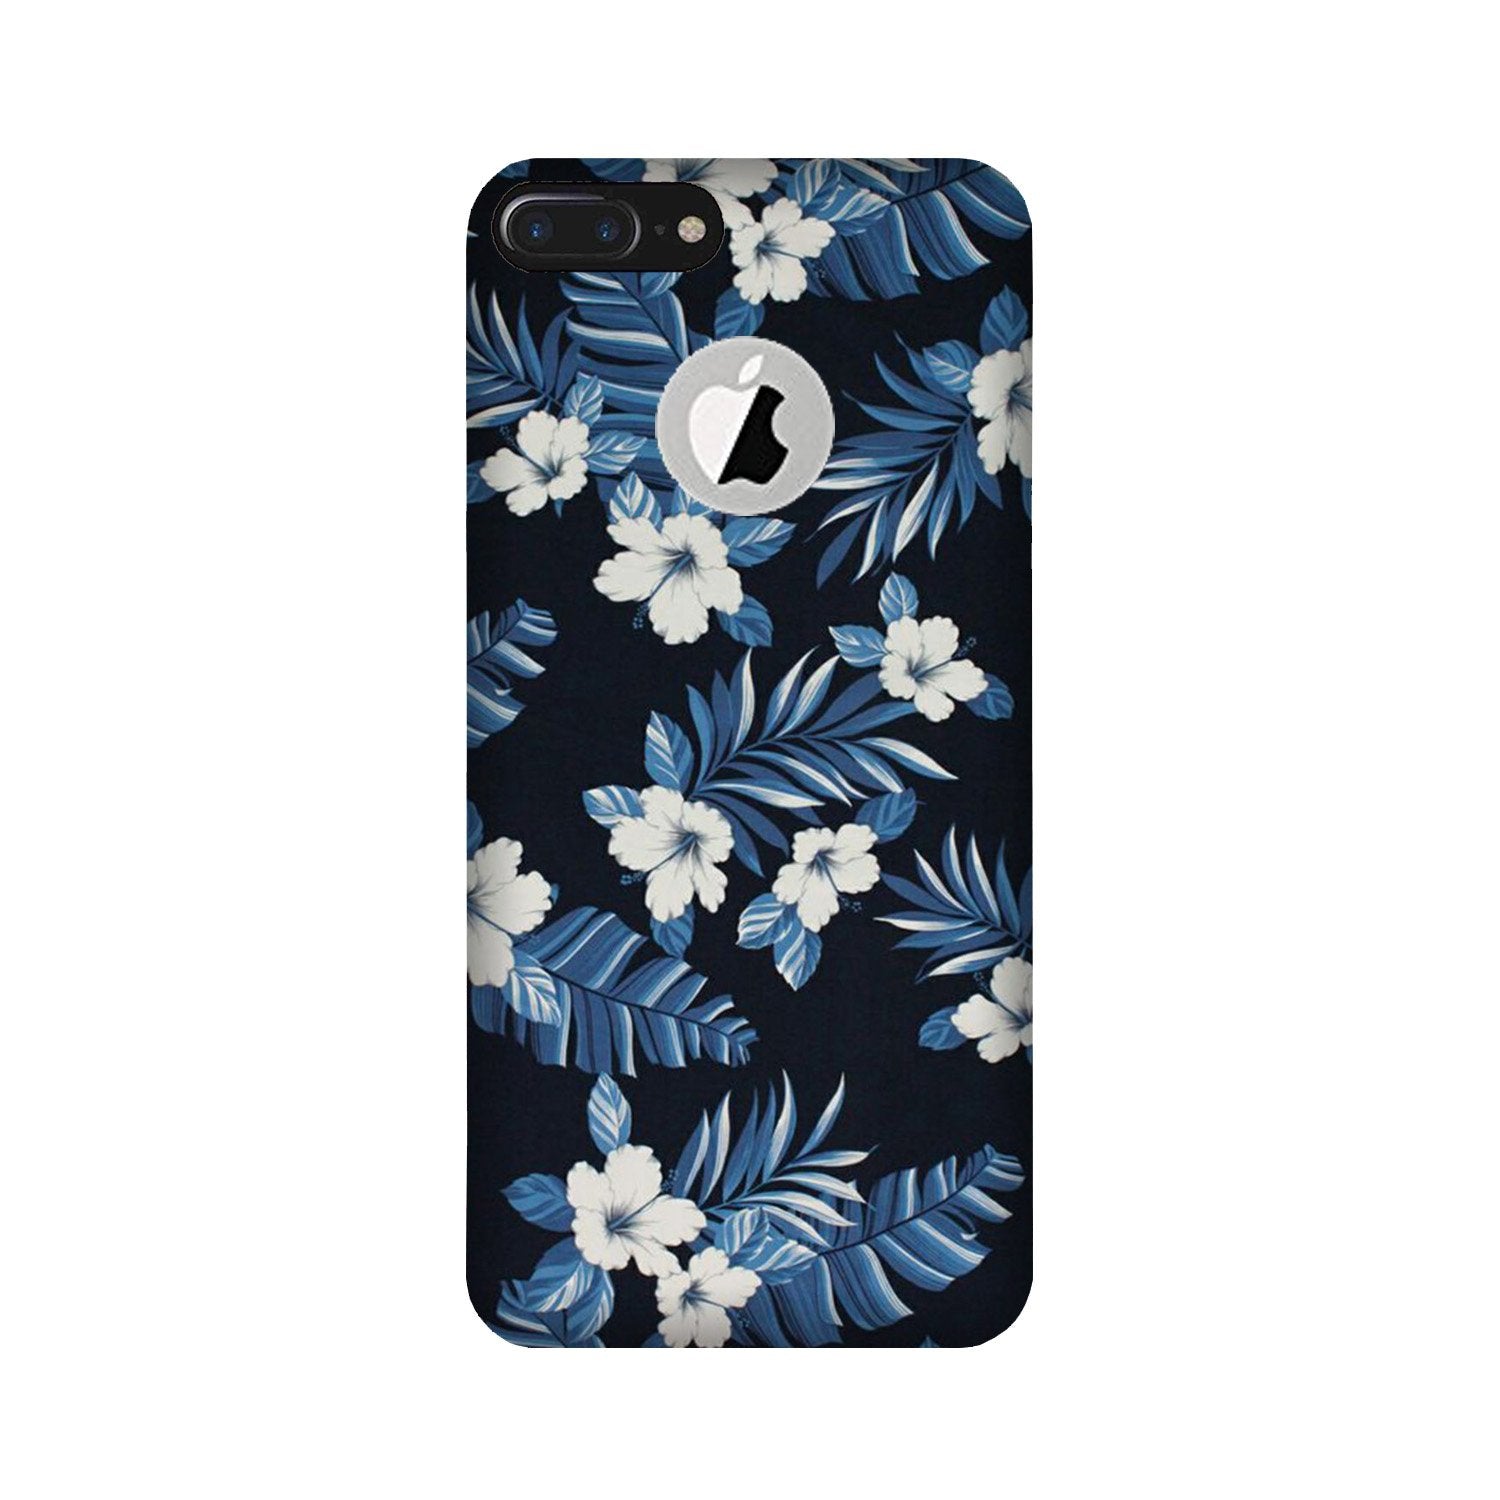 White flowers Blue Background2 Case for iPhone 7 Plus logo cut